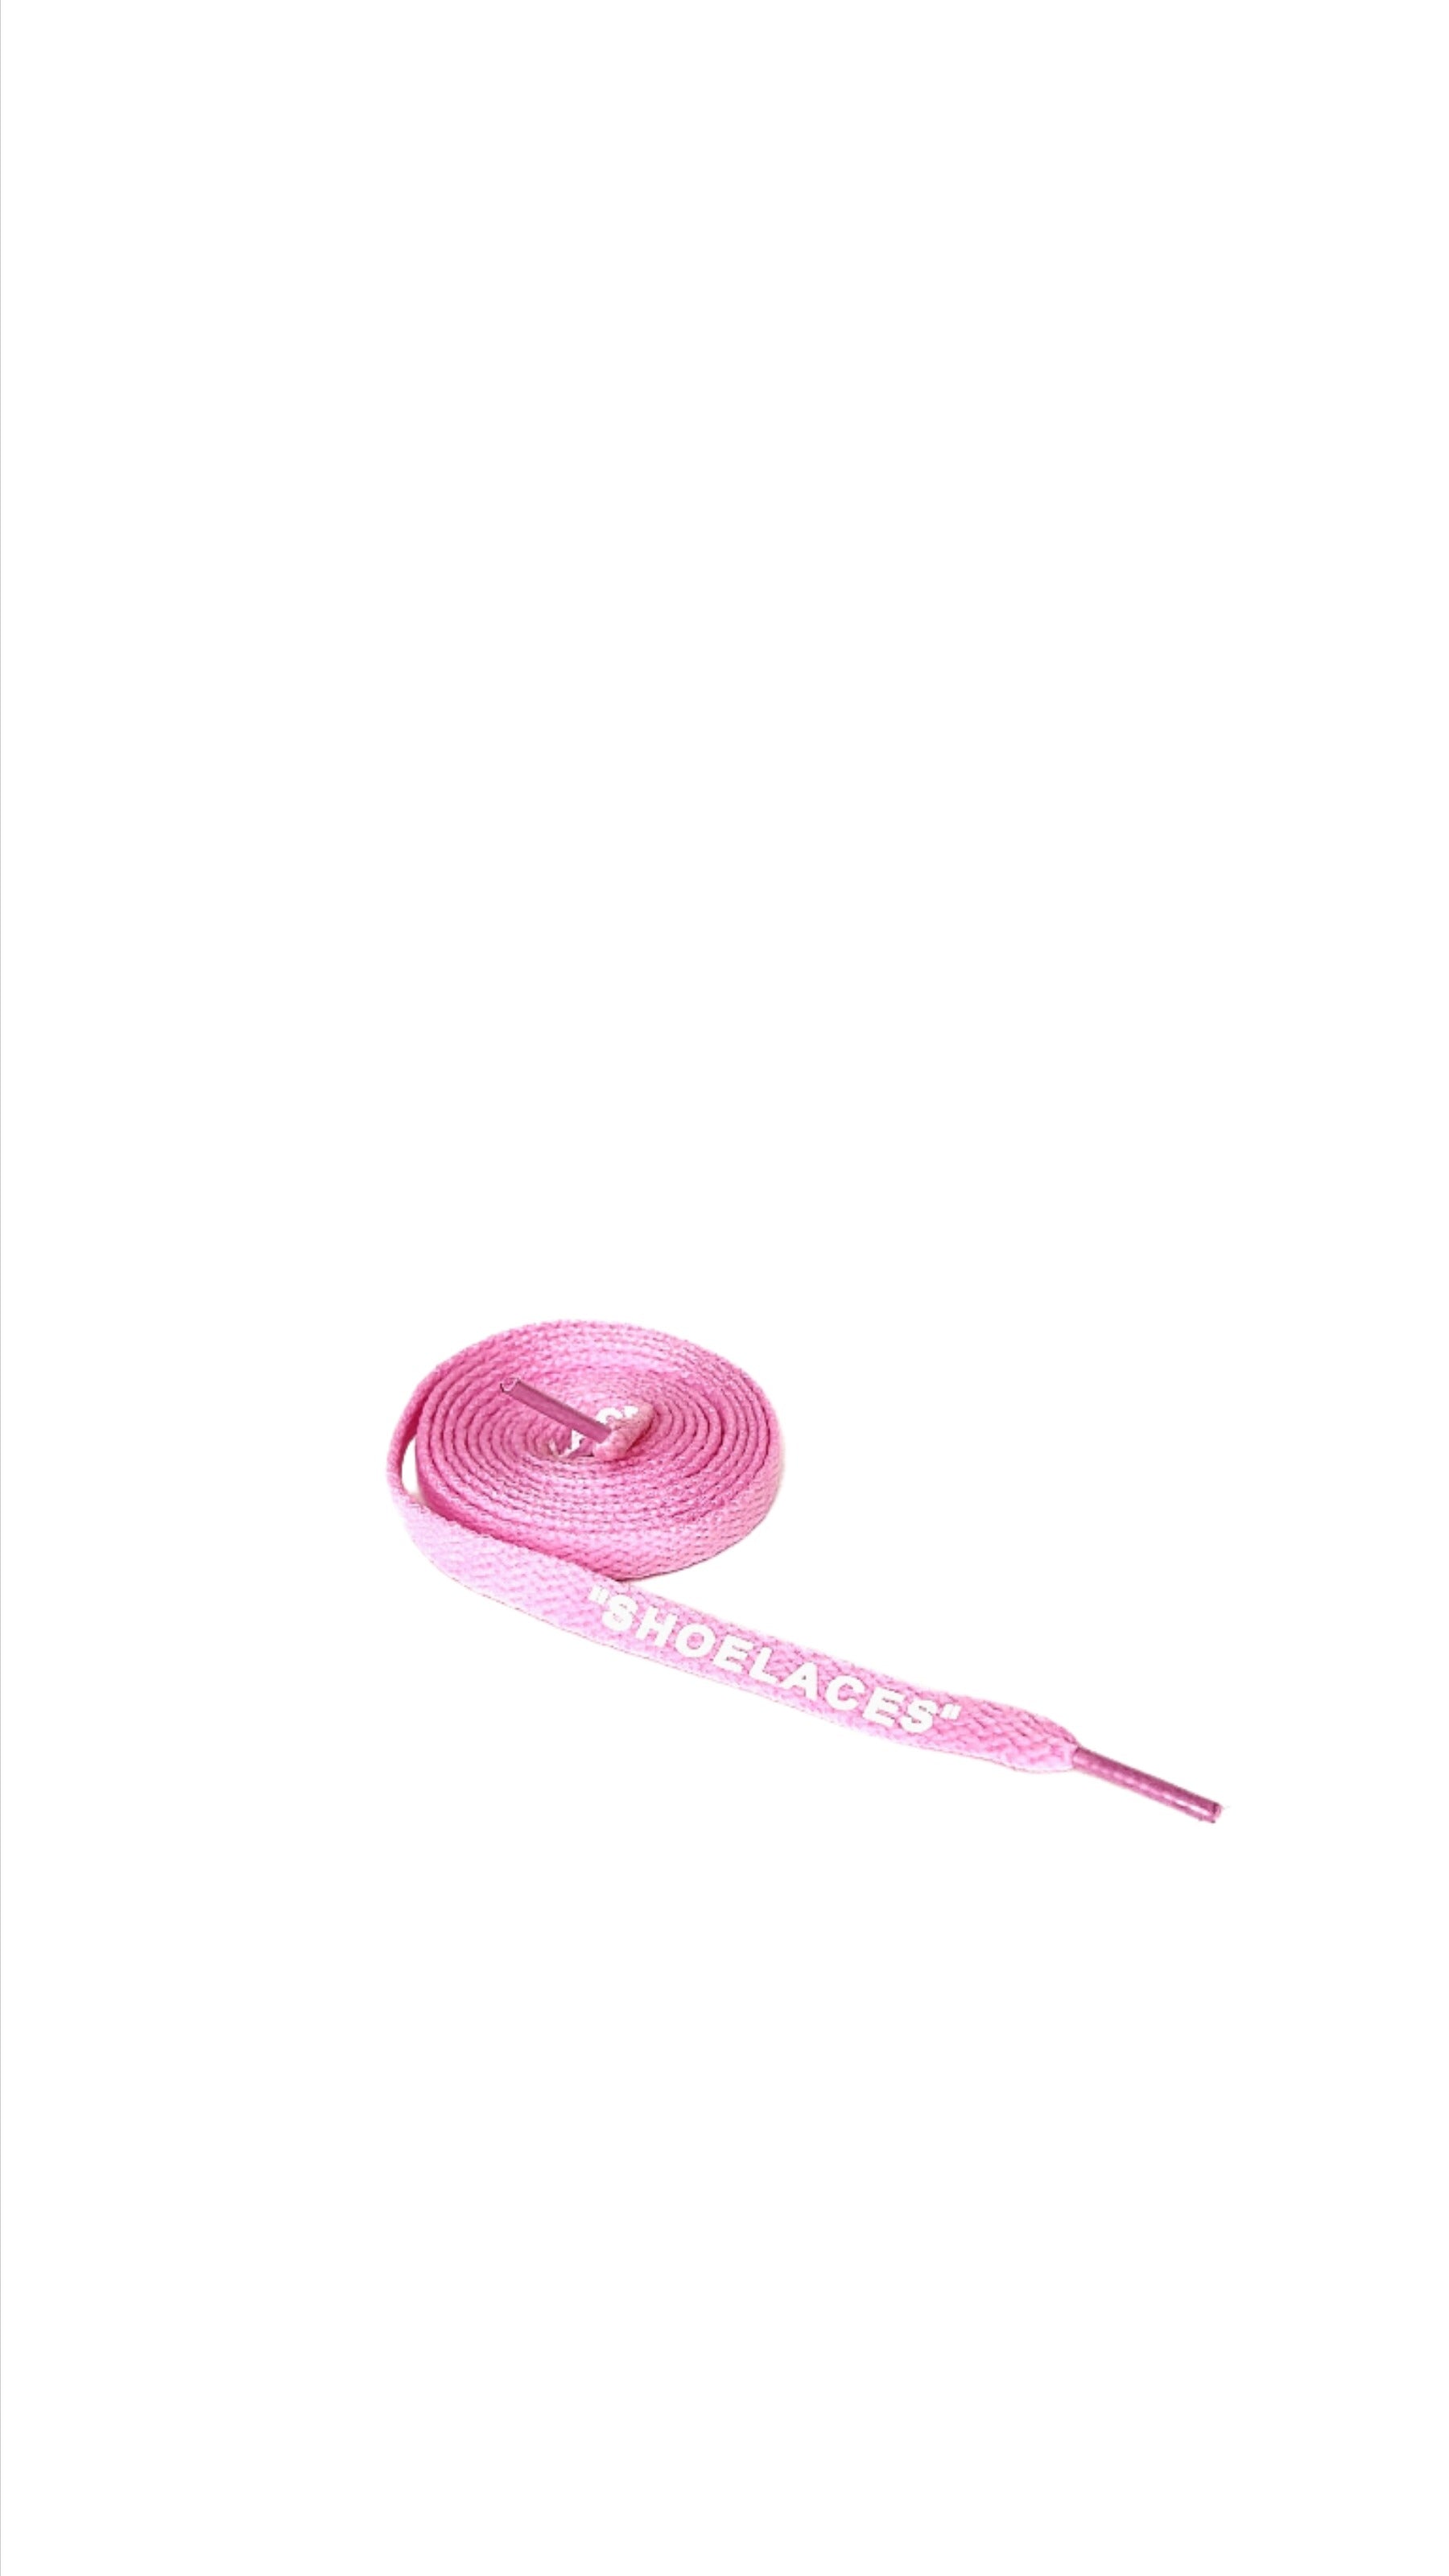 BABY PINK OFF-WHITE STYLE "SHOELACES" BY TGLC